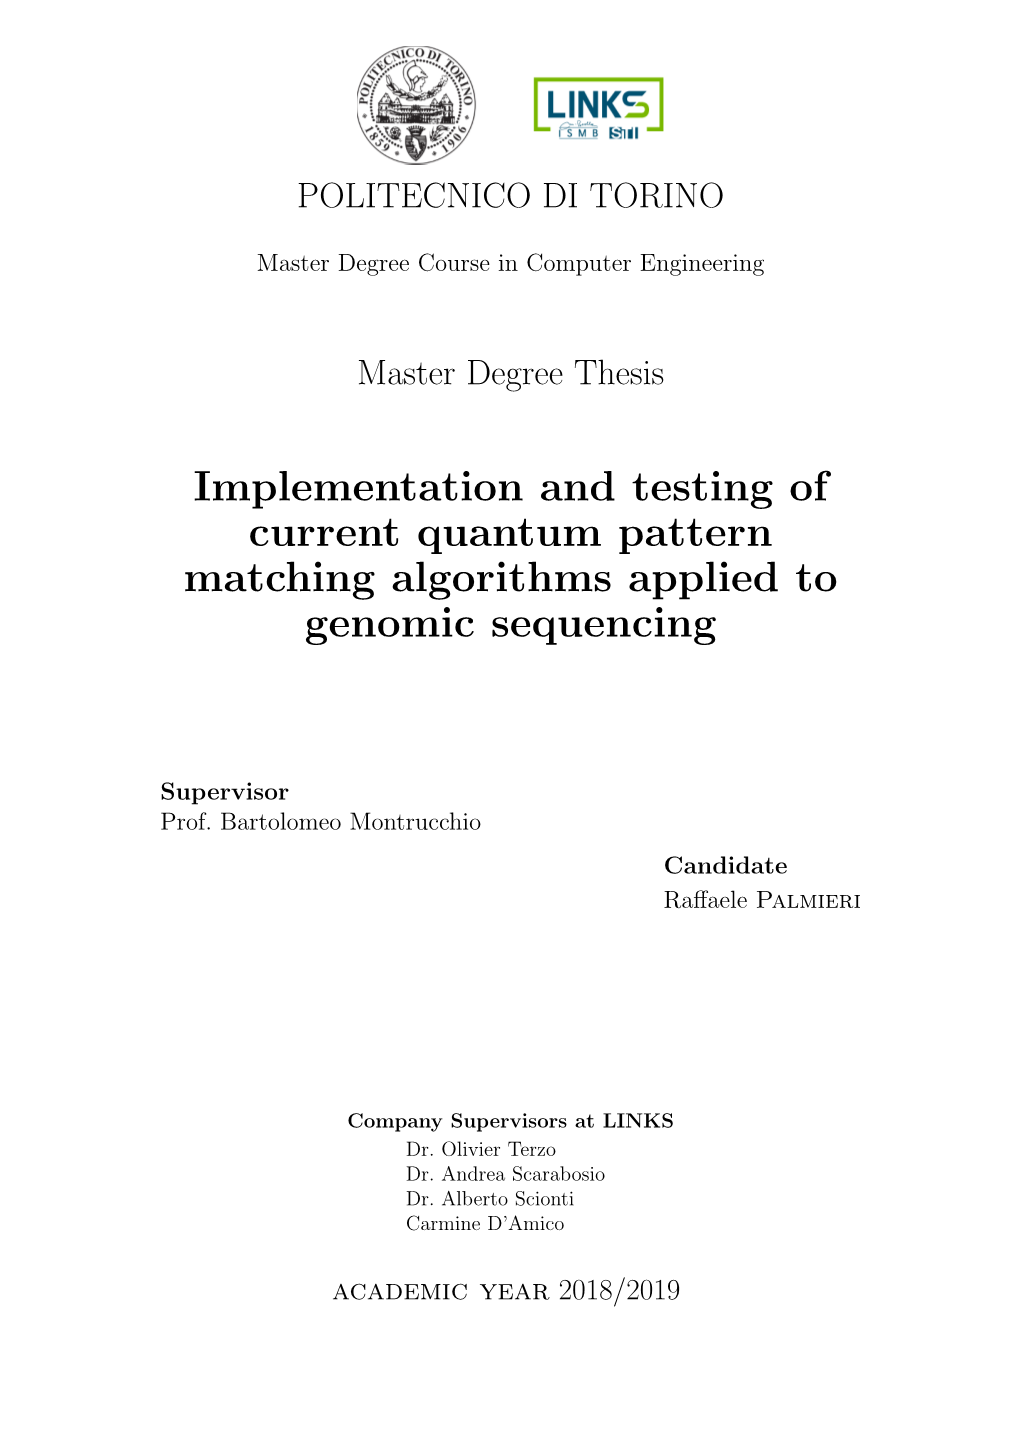 Implementation and Testing of Current Quantum Pattern Matching Algorithms Applied to Genomic Sequencing